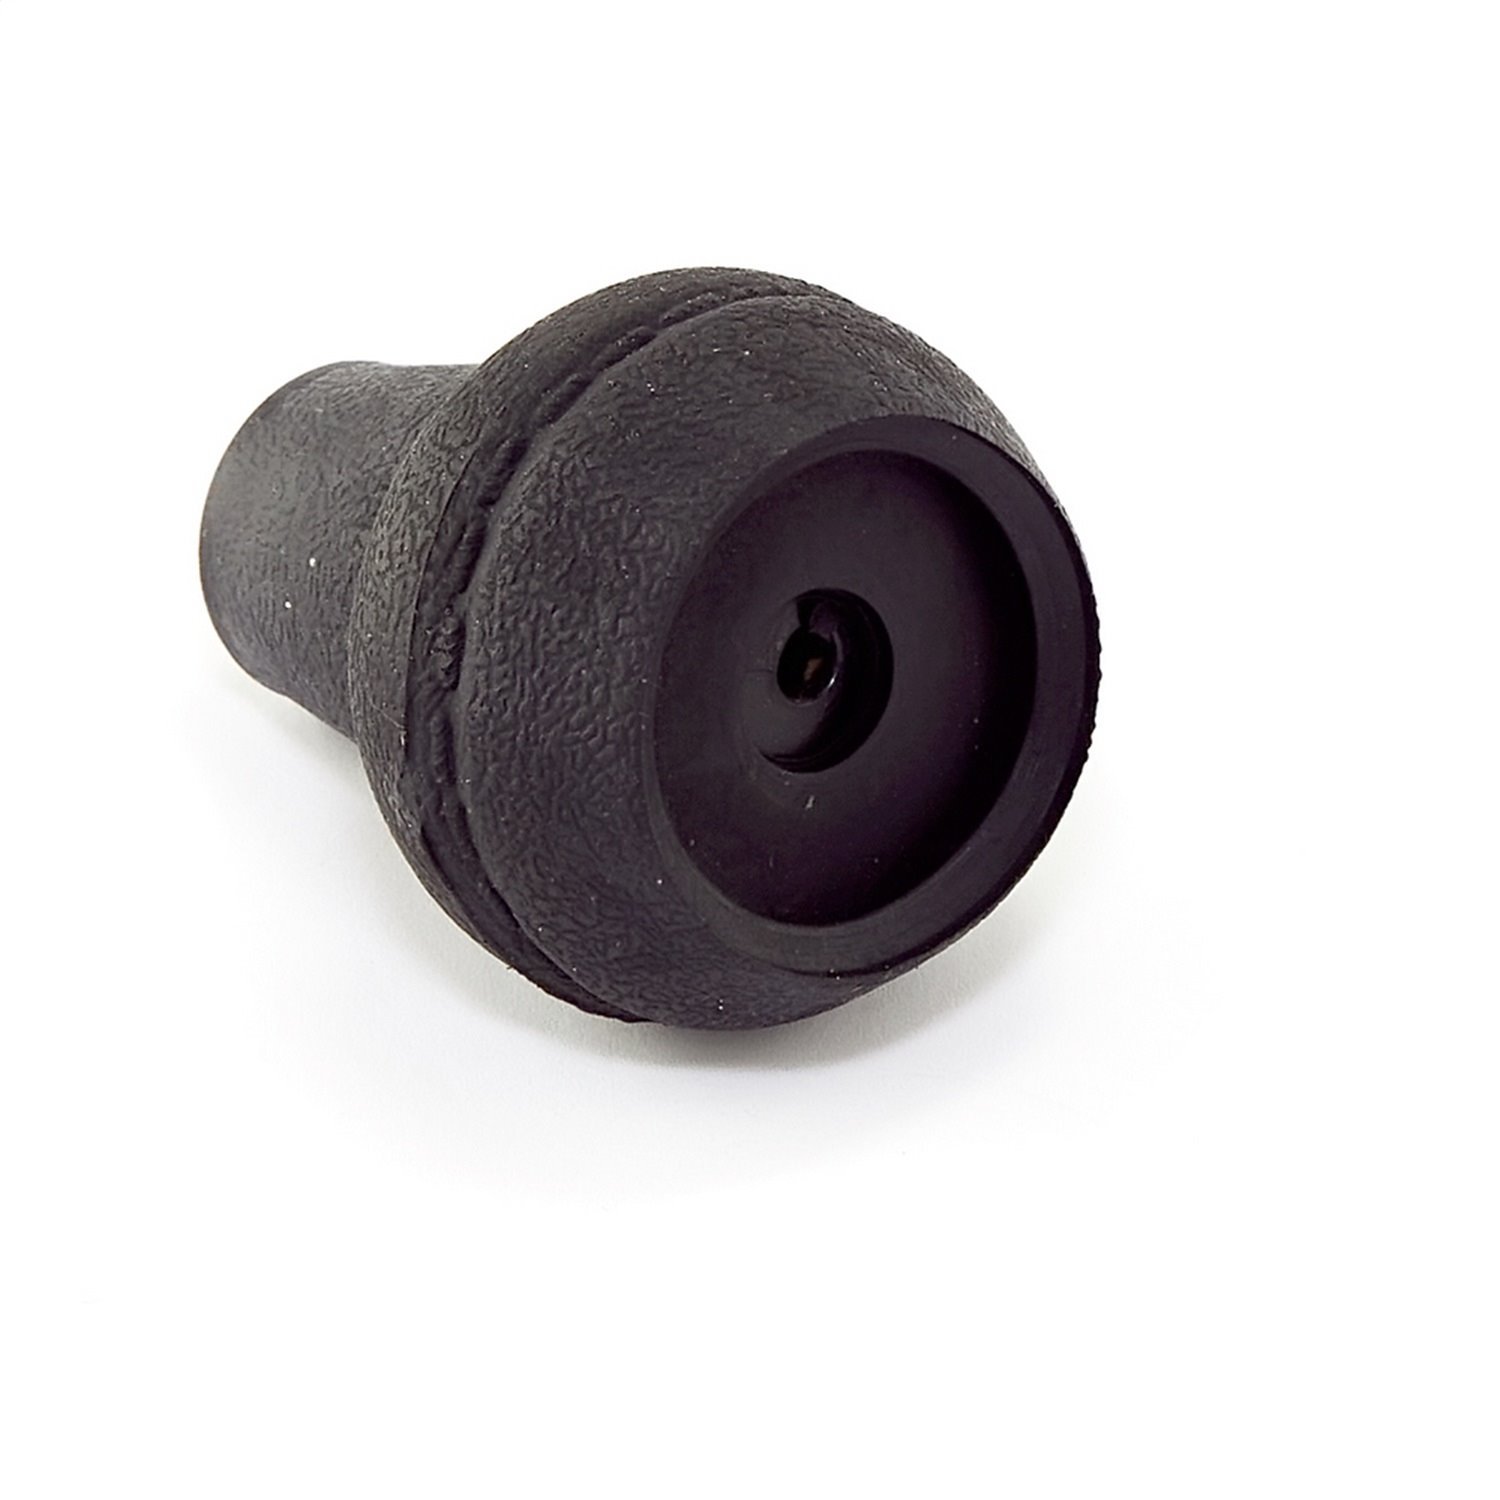 Replacement shift knob, Fits 80-86 Jeep CJ-5 CJ-6 and CJ-8 with Dana 300 transfer case and a T-4